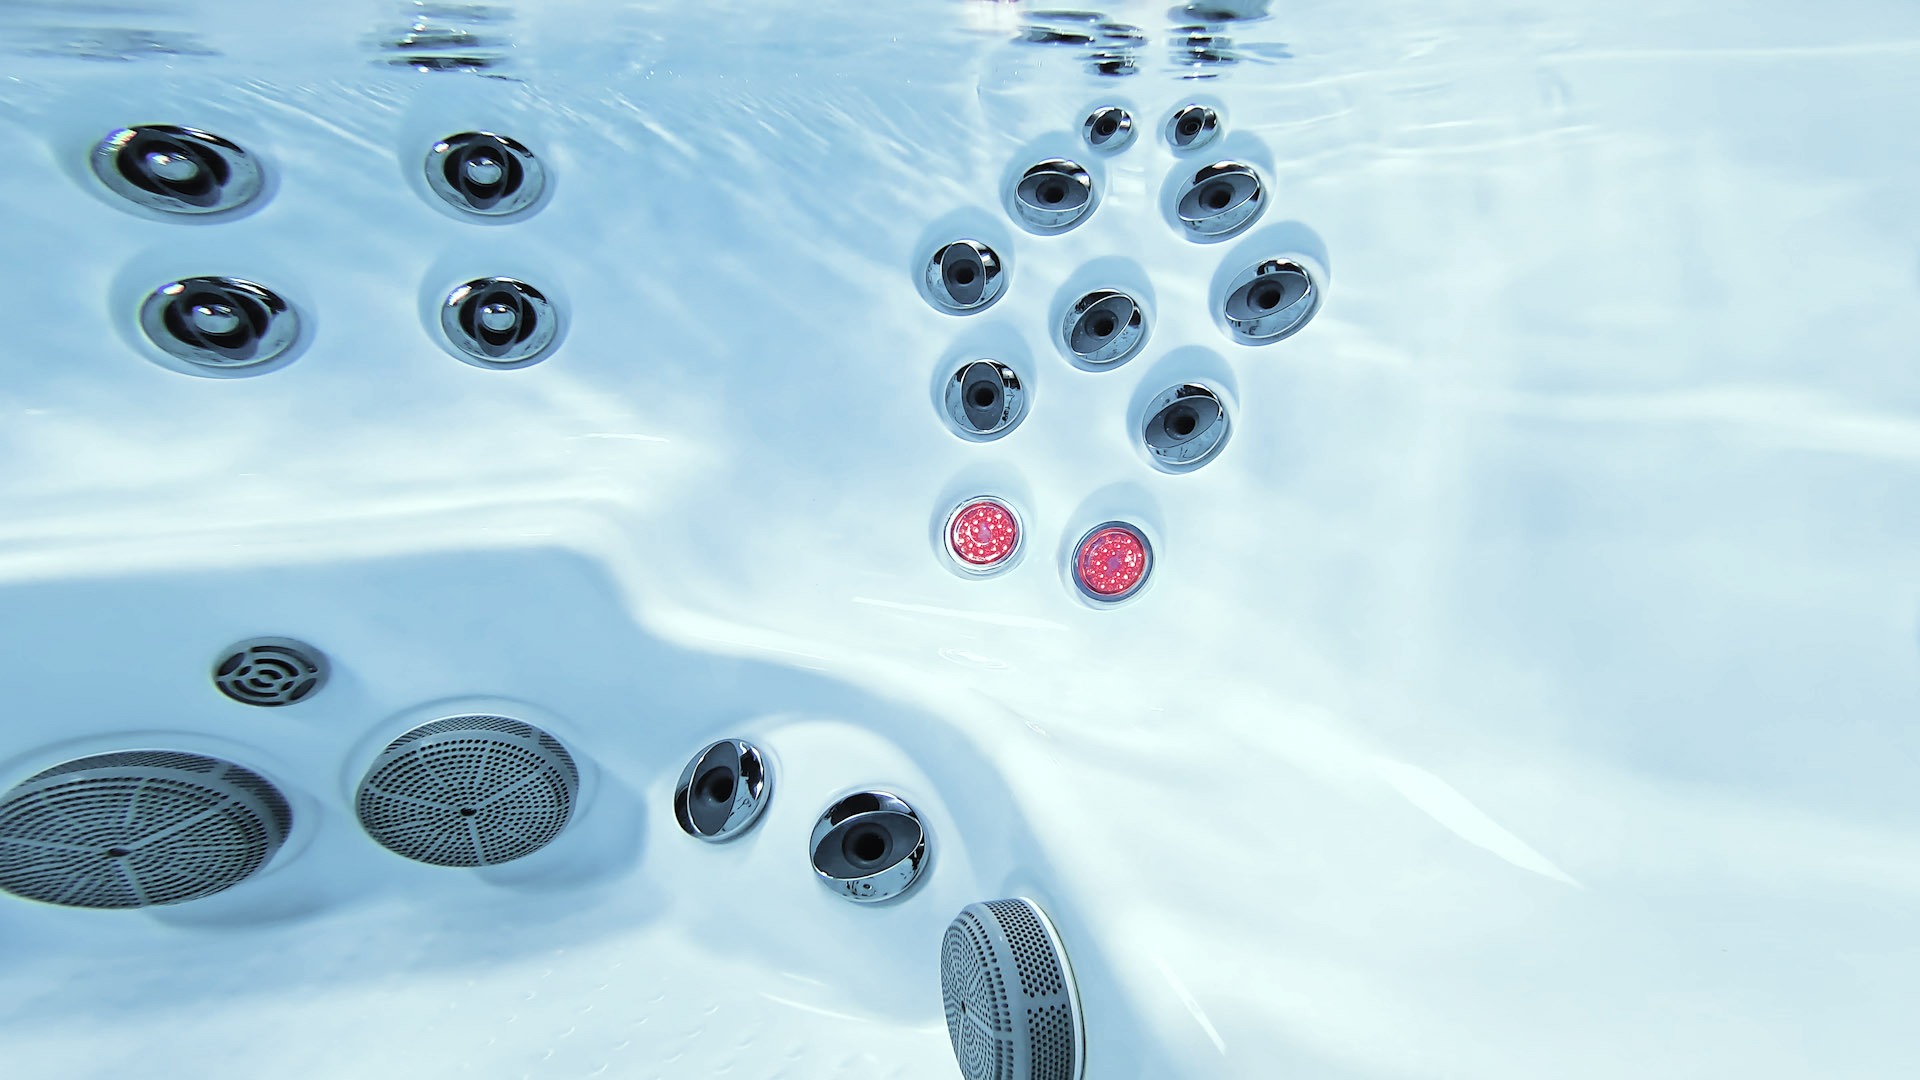 jacuzzi-spa-j-lx-features-ir-therapy-jets-off-lights-on.jpg